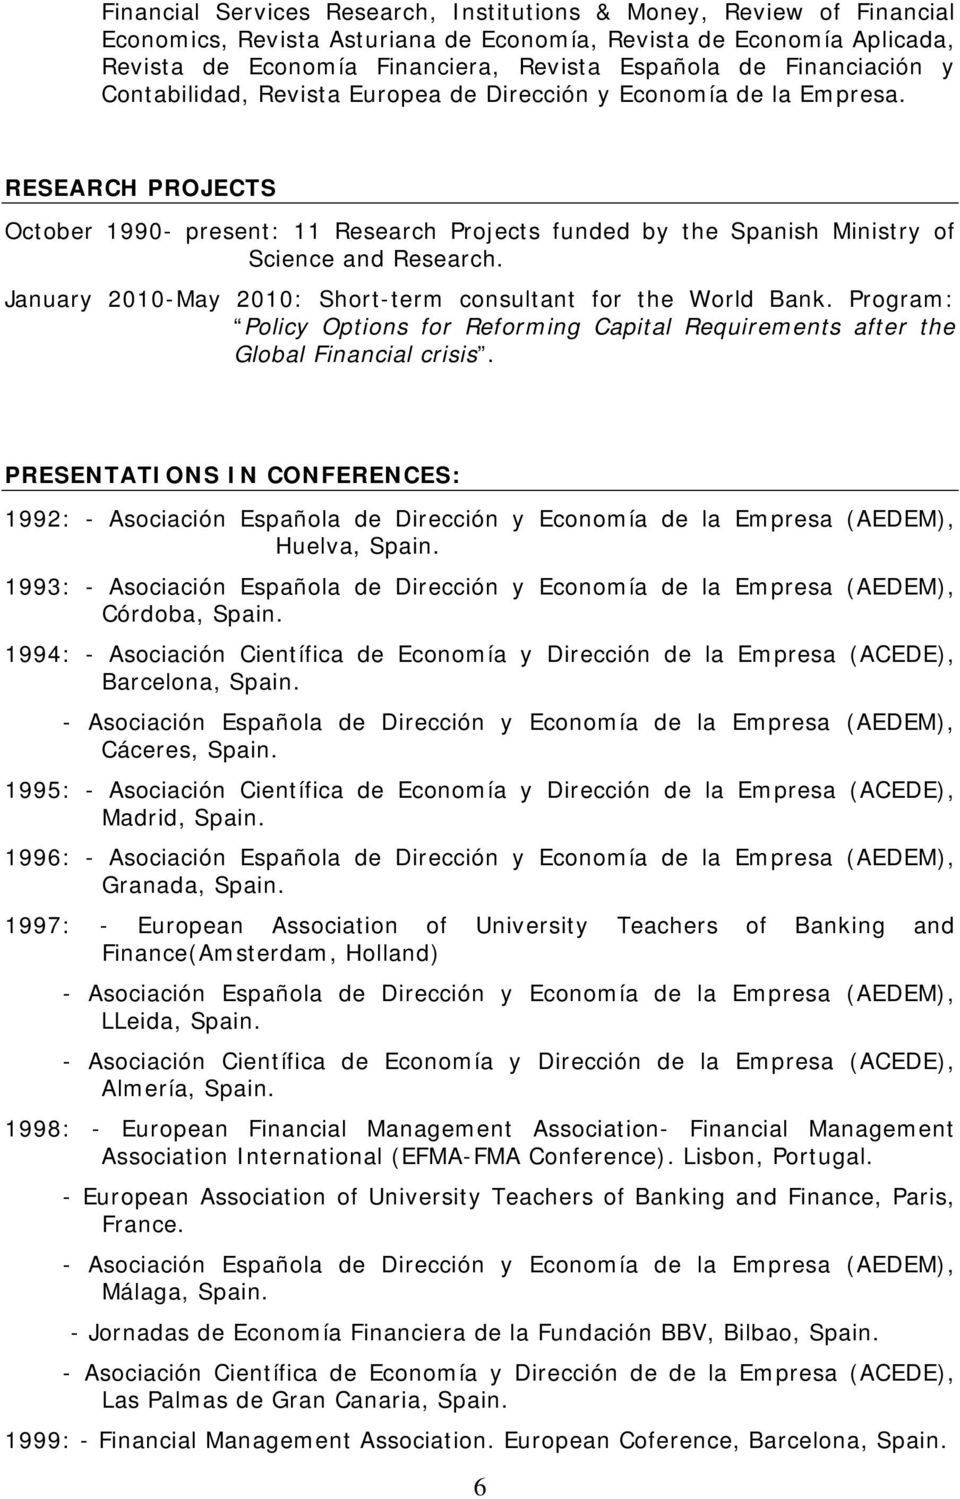 RESEARCH PROJECTS October 1990- present: 11 Research Projects funded by the Spanish Ministry of Science and Research. January 2010-May 2010: Short-term consultant for the World Bank.